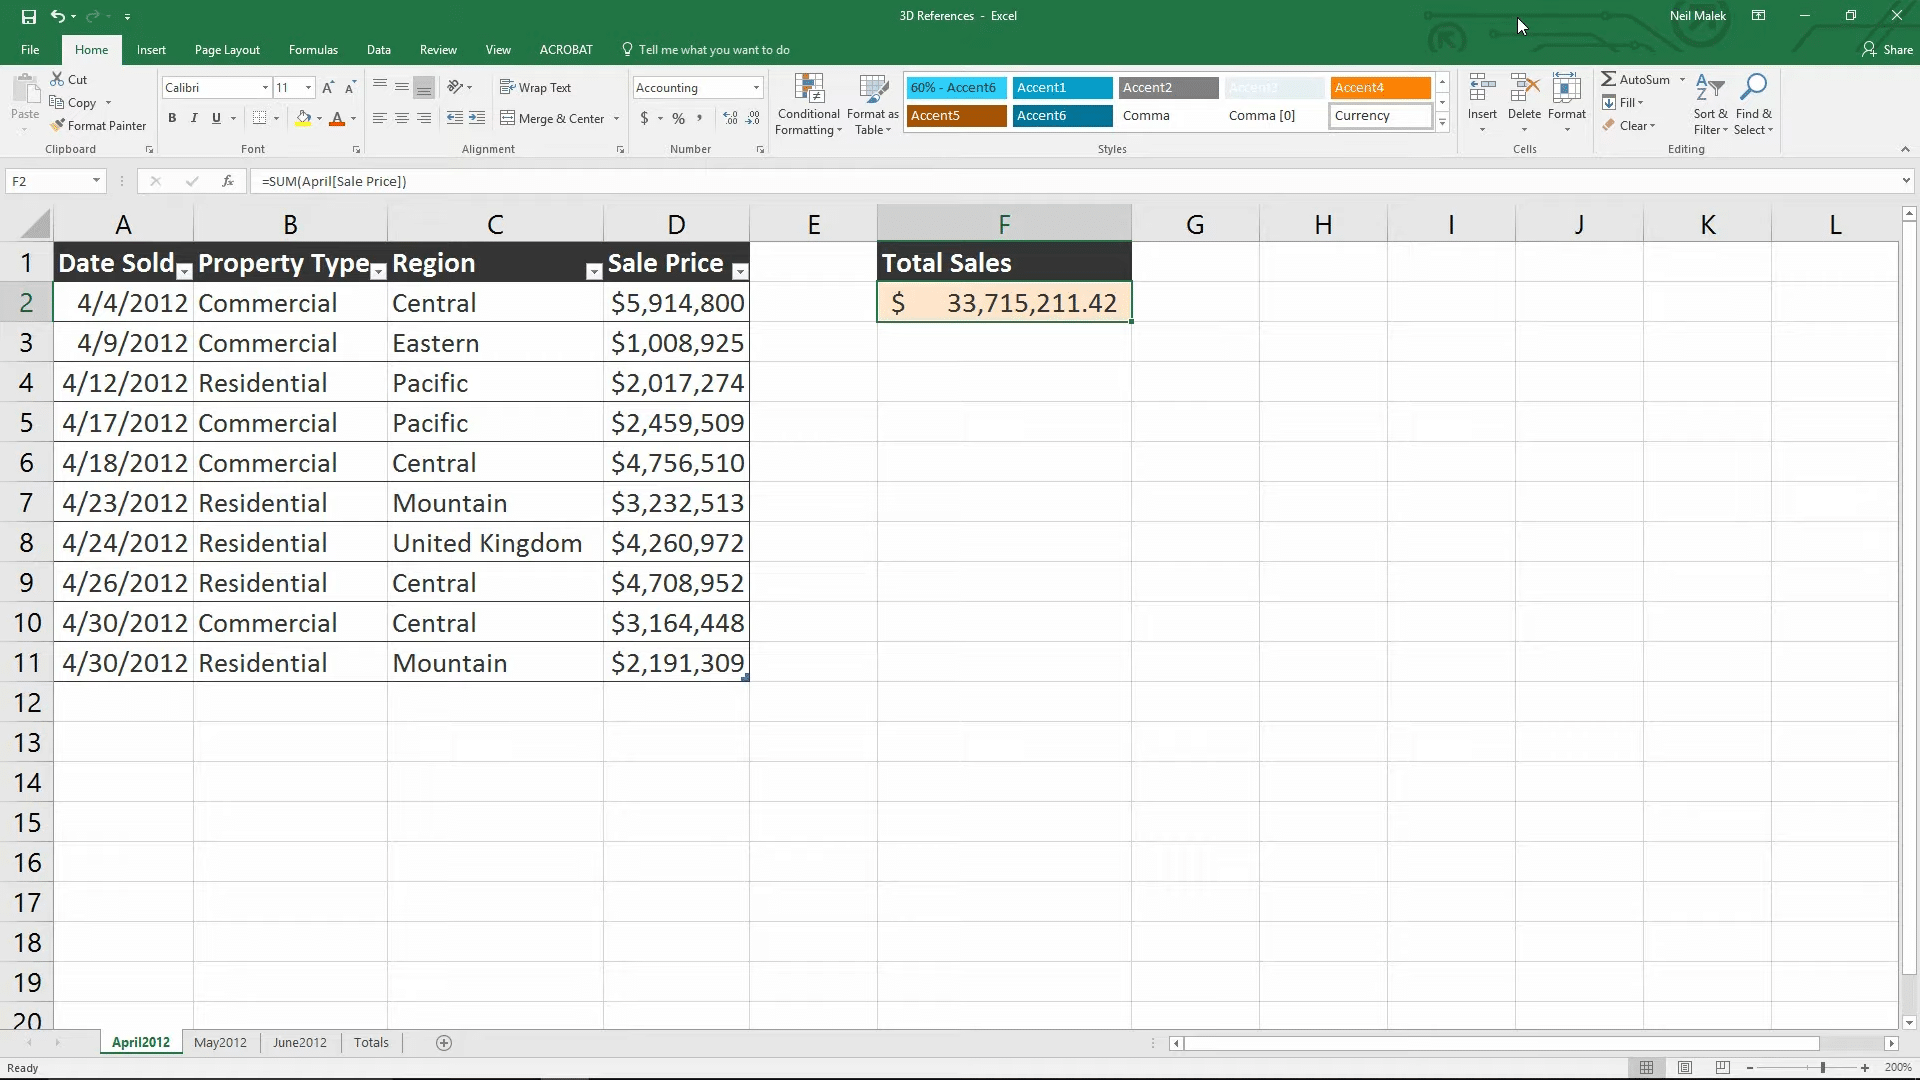 What is 3D Reference in Excel?